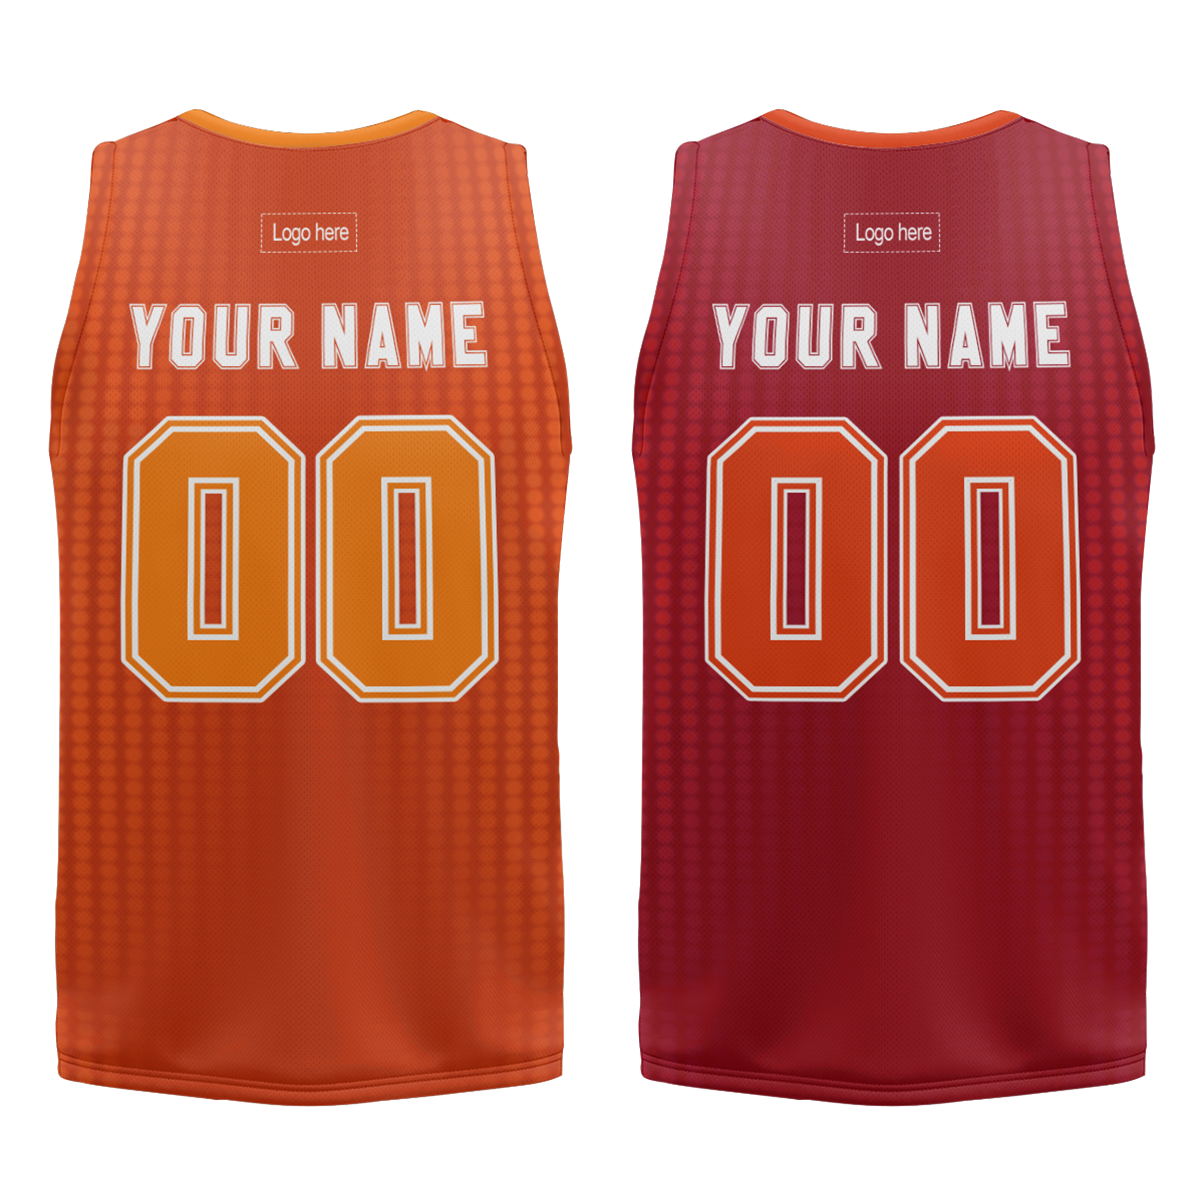 full-sublimation-printing-basketball-uniform-custom-your-own-logo-basketball-jersey-with-oem-service-at-cj-pod-6